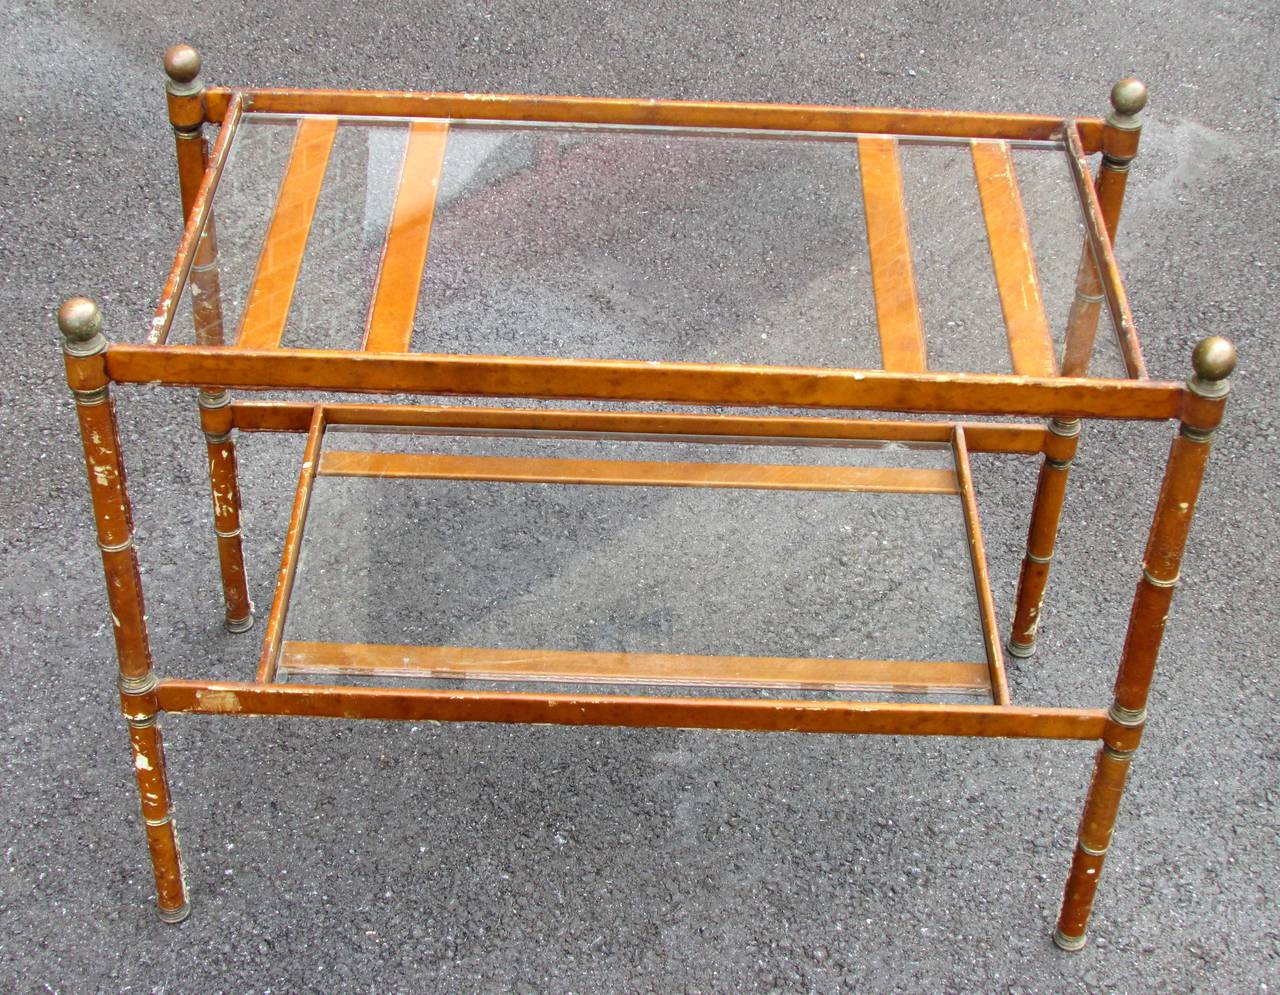 Two tiered end table with stitched leather covered metal frame and brass accents by Jacques Adnet